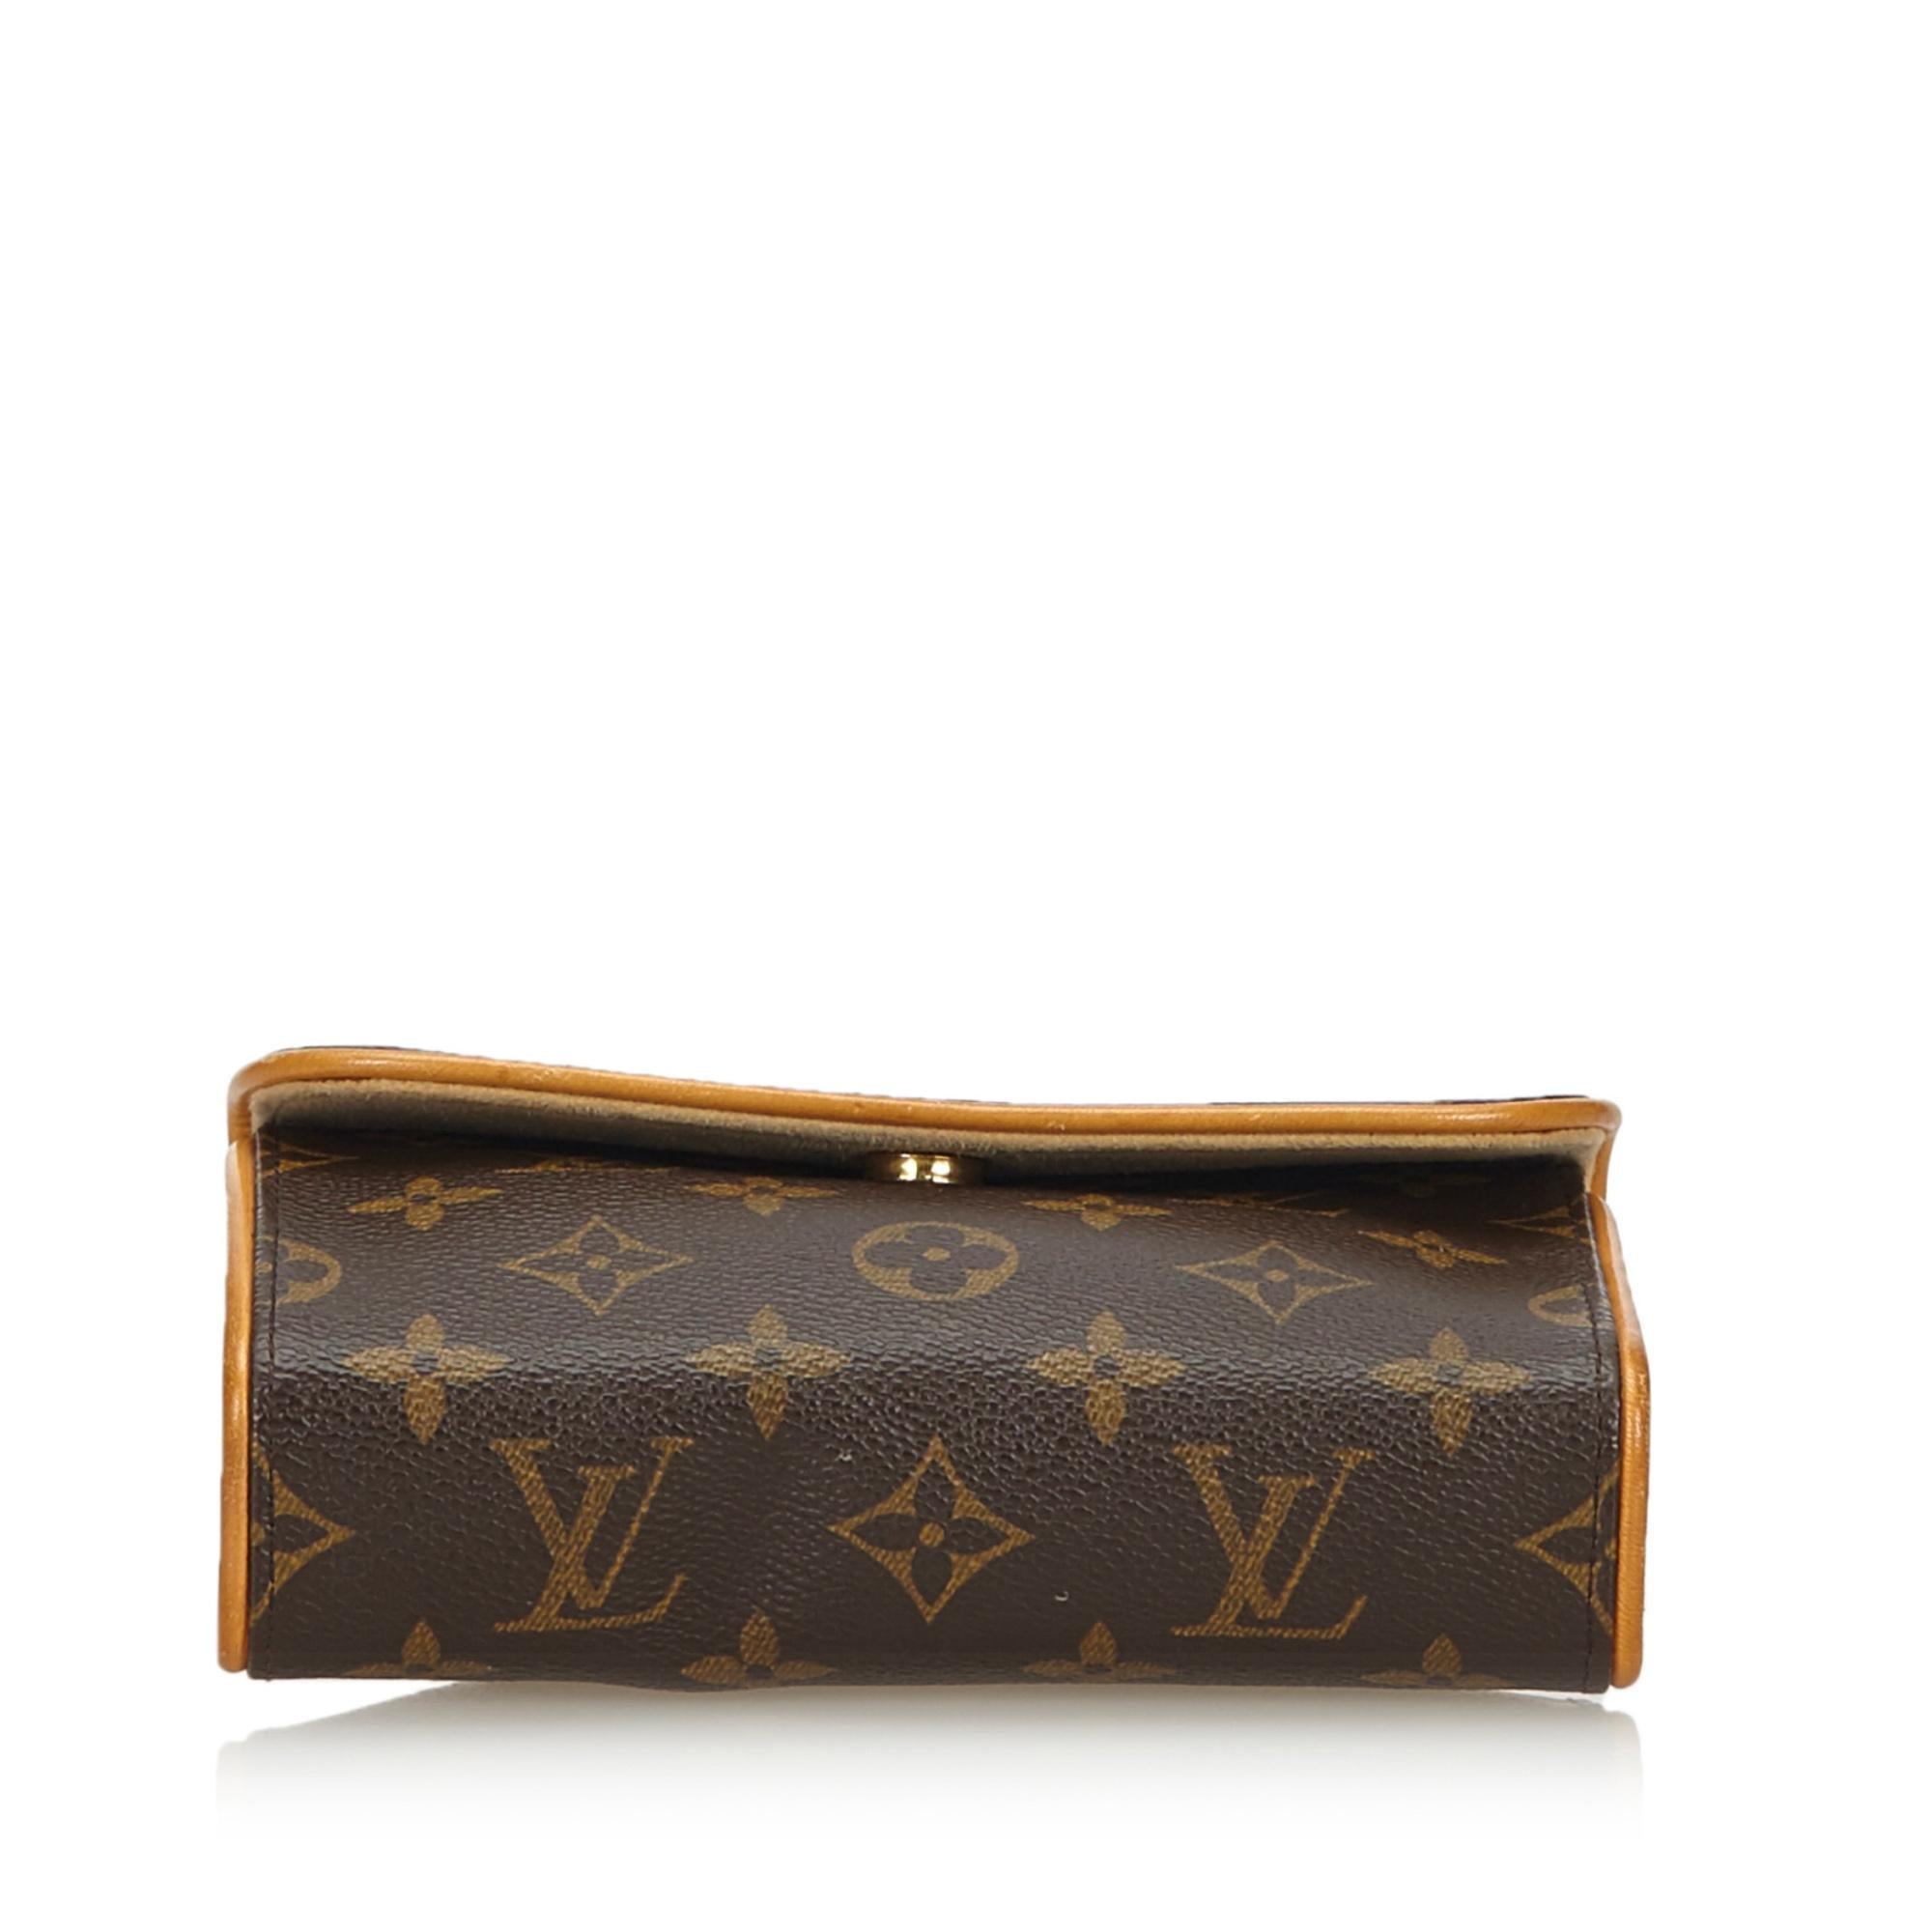 Vintage Authentic Louis Vuitton Florentine Pochette France w Dust Bag SMALL  In Good Condition For Sale In Orlando, FL